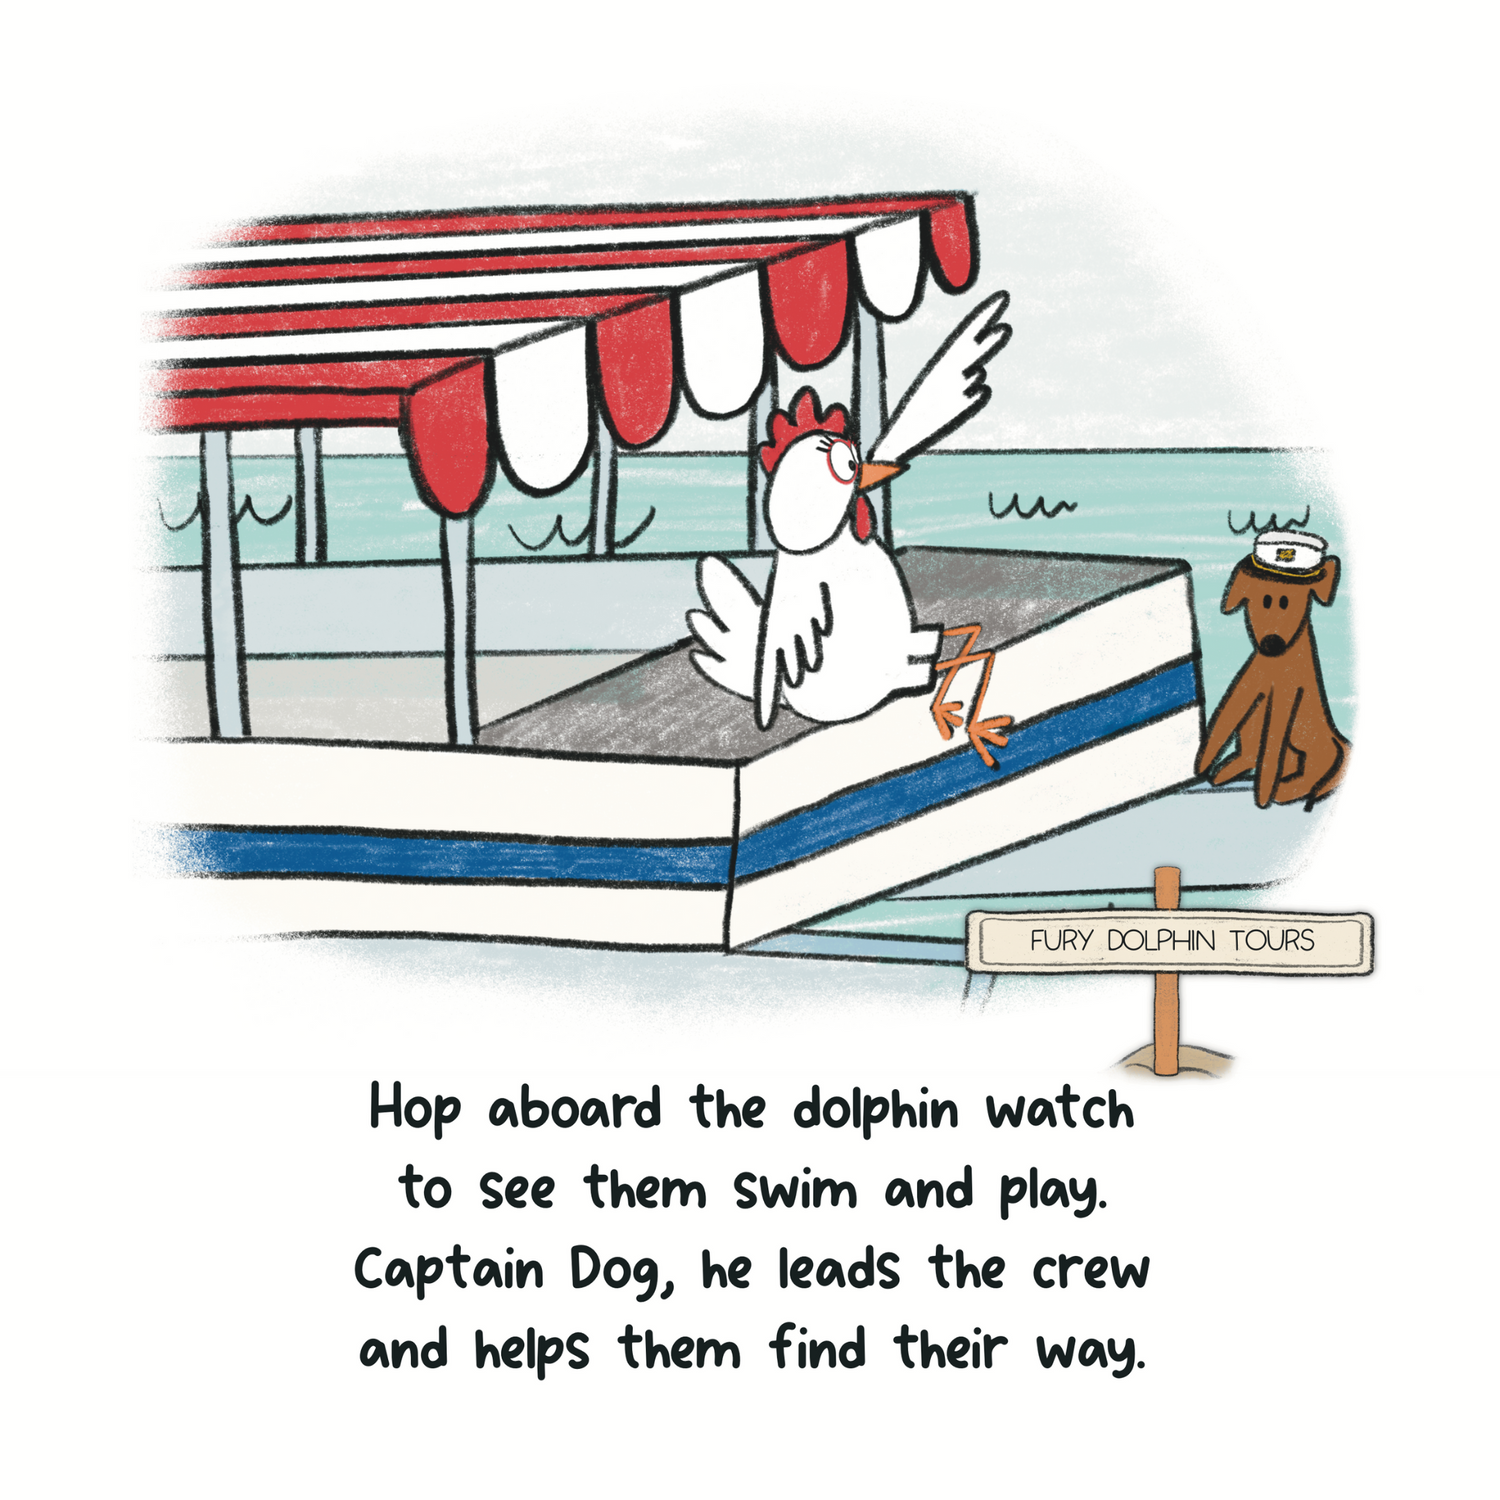 A Key West iconic Fury Dolphin watch illustration from self published author and illustrator, Lindsay Dain's book titled "Why Did the Chicken Cross the Road in Key West?" created and available through Amazon KDP and Kindle Direct Publishing